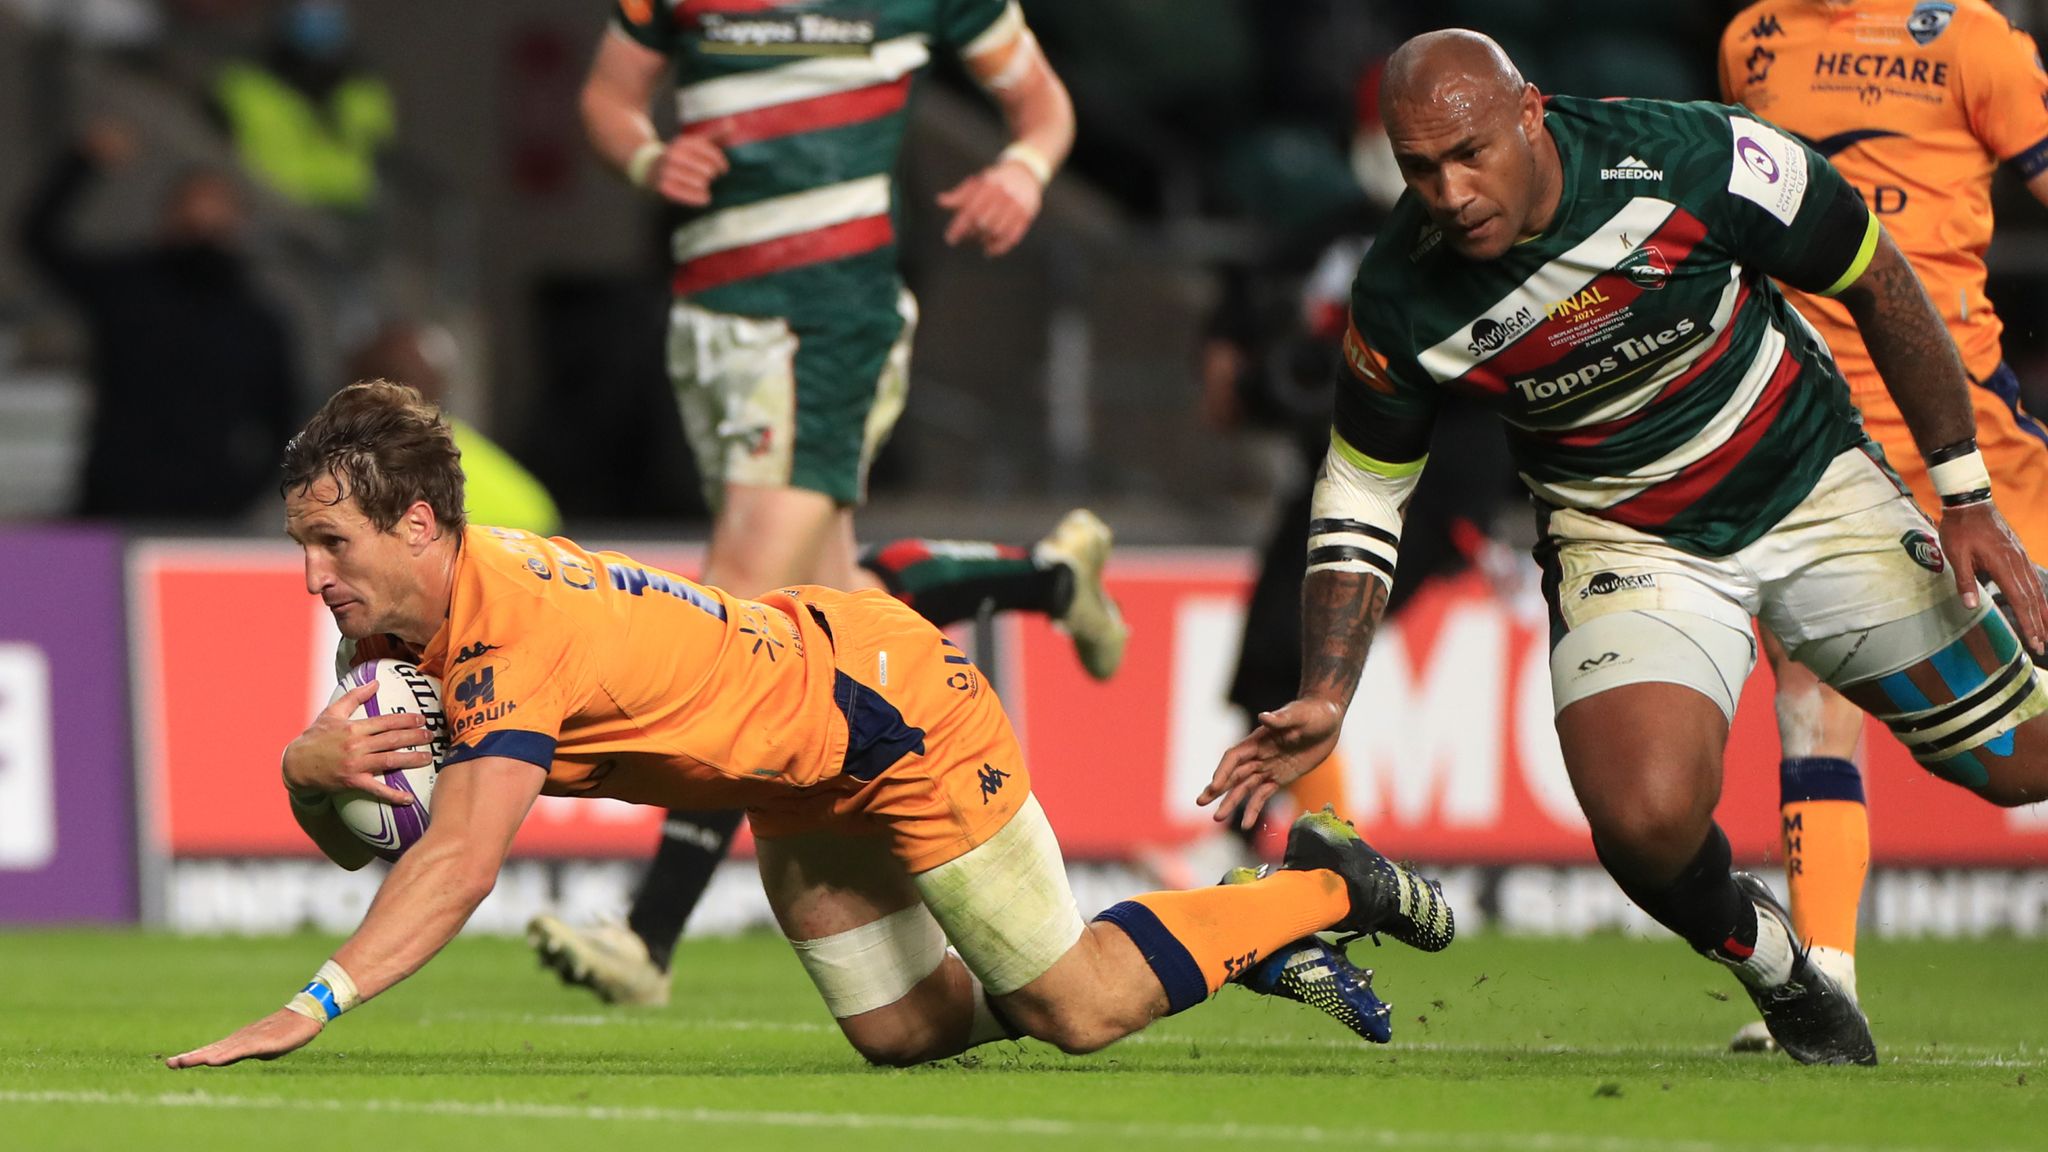 Leicester Tigers 17-18 Montpellier Johan Goosens stunning team try clinches Challenge Cup title Rugby Union News Sky Sports